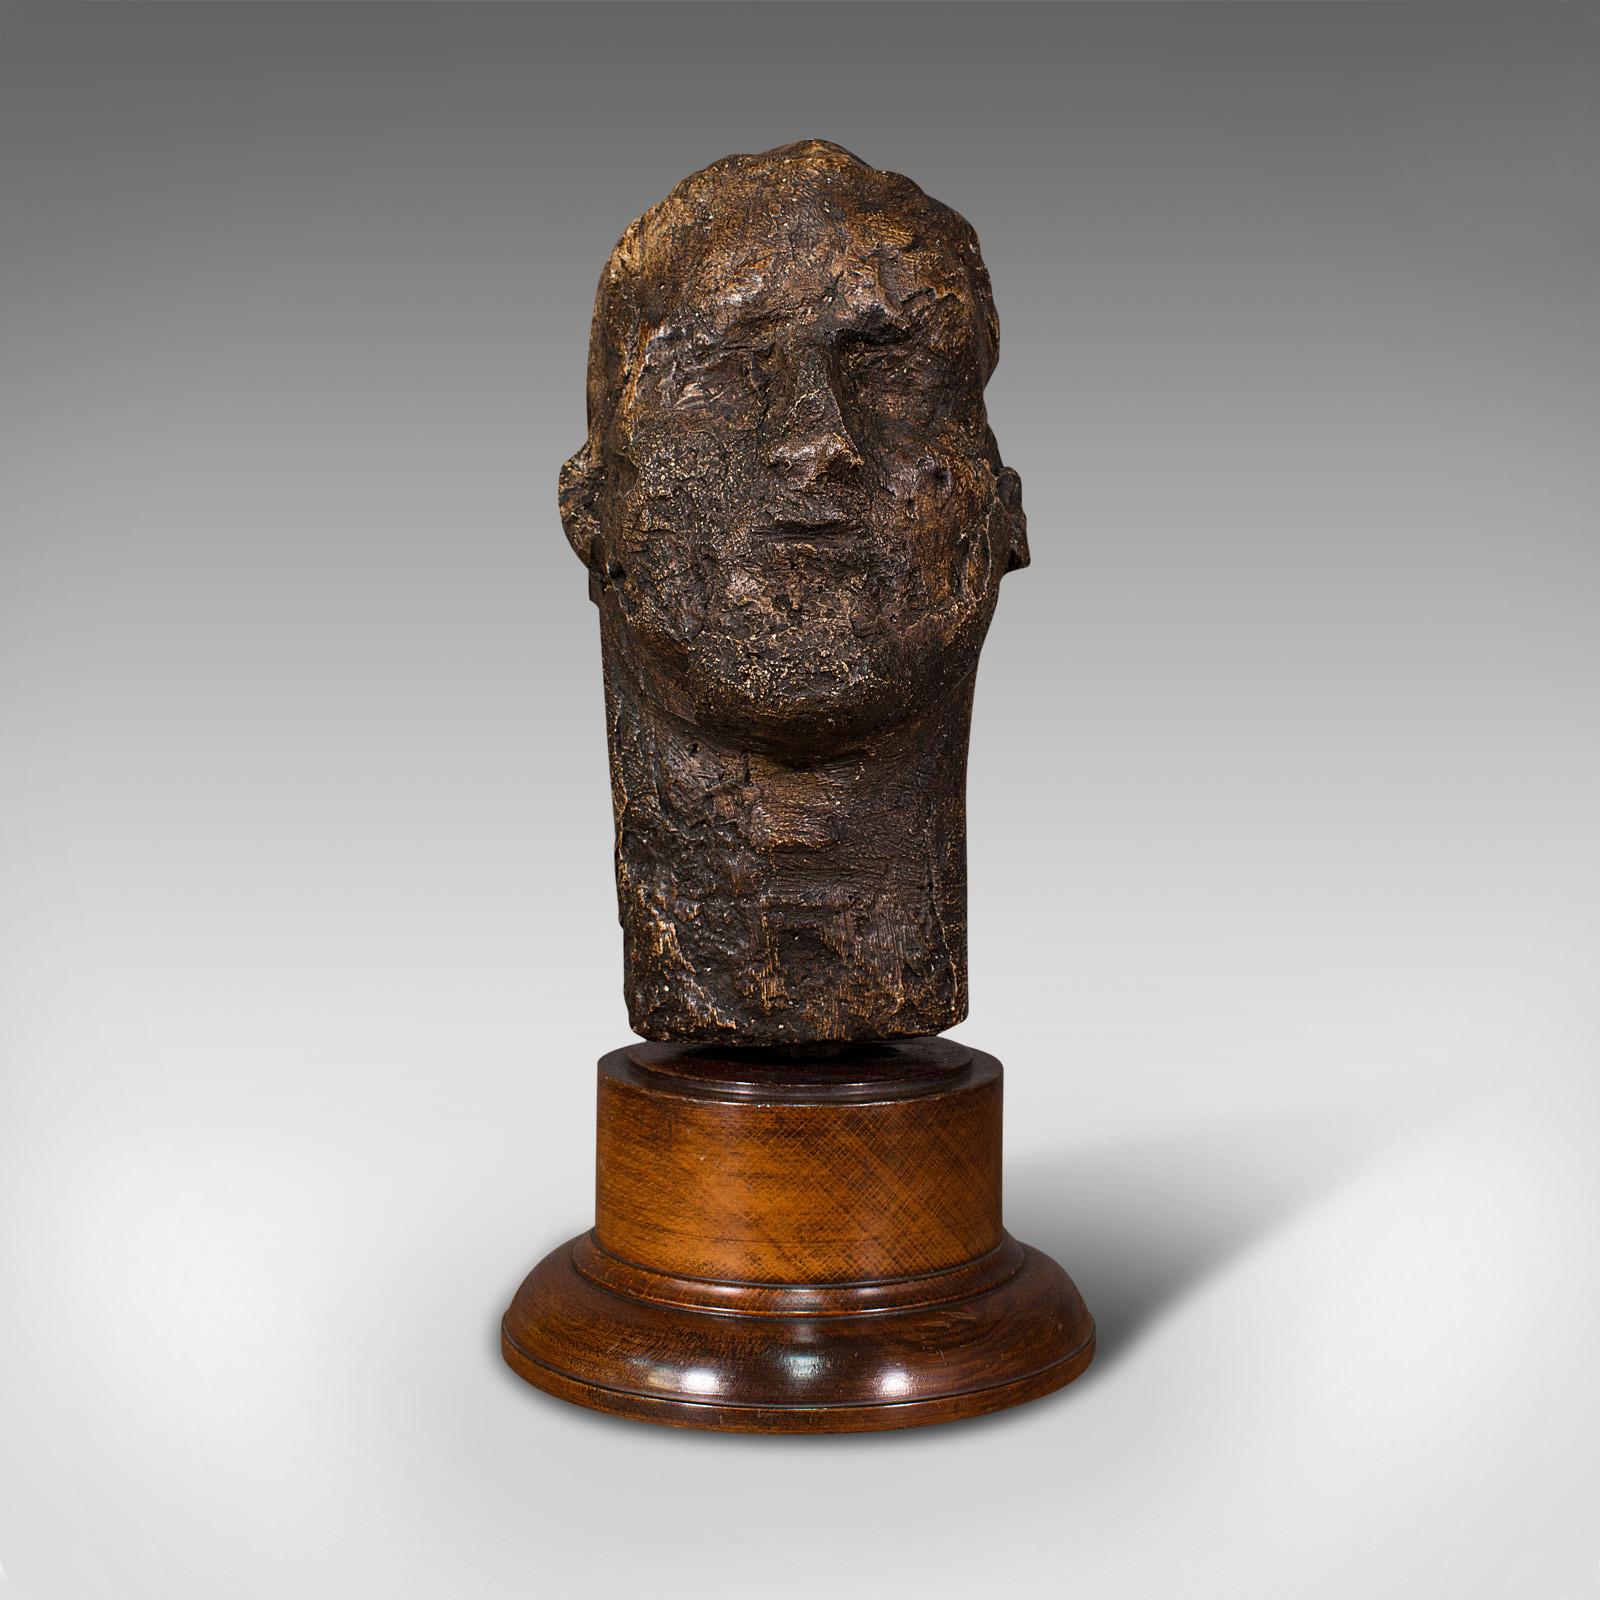 This is an antique male portrait bust. A Continental, plaster sculpture presented upon an oak base, dating to the mid Victorian period, circa 1860.

Of striking appearance with shimmering tones and raw finish
Displaying a desirable aged patina